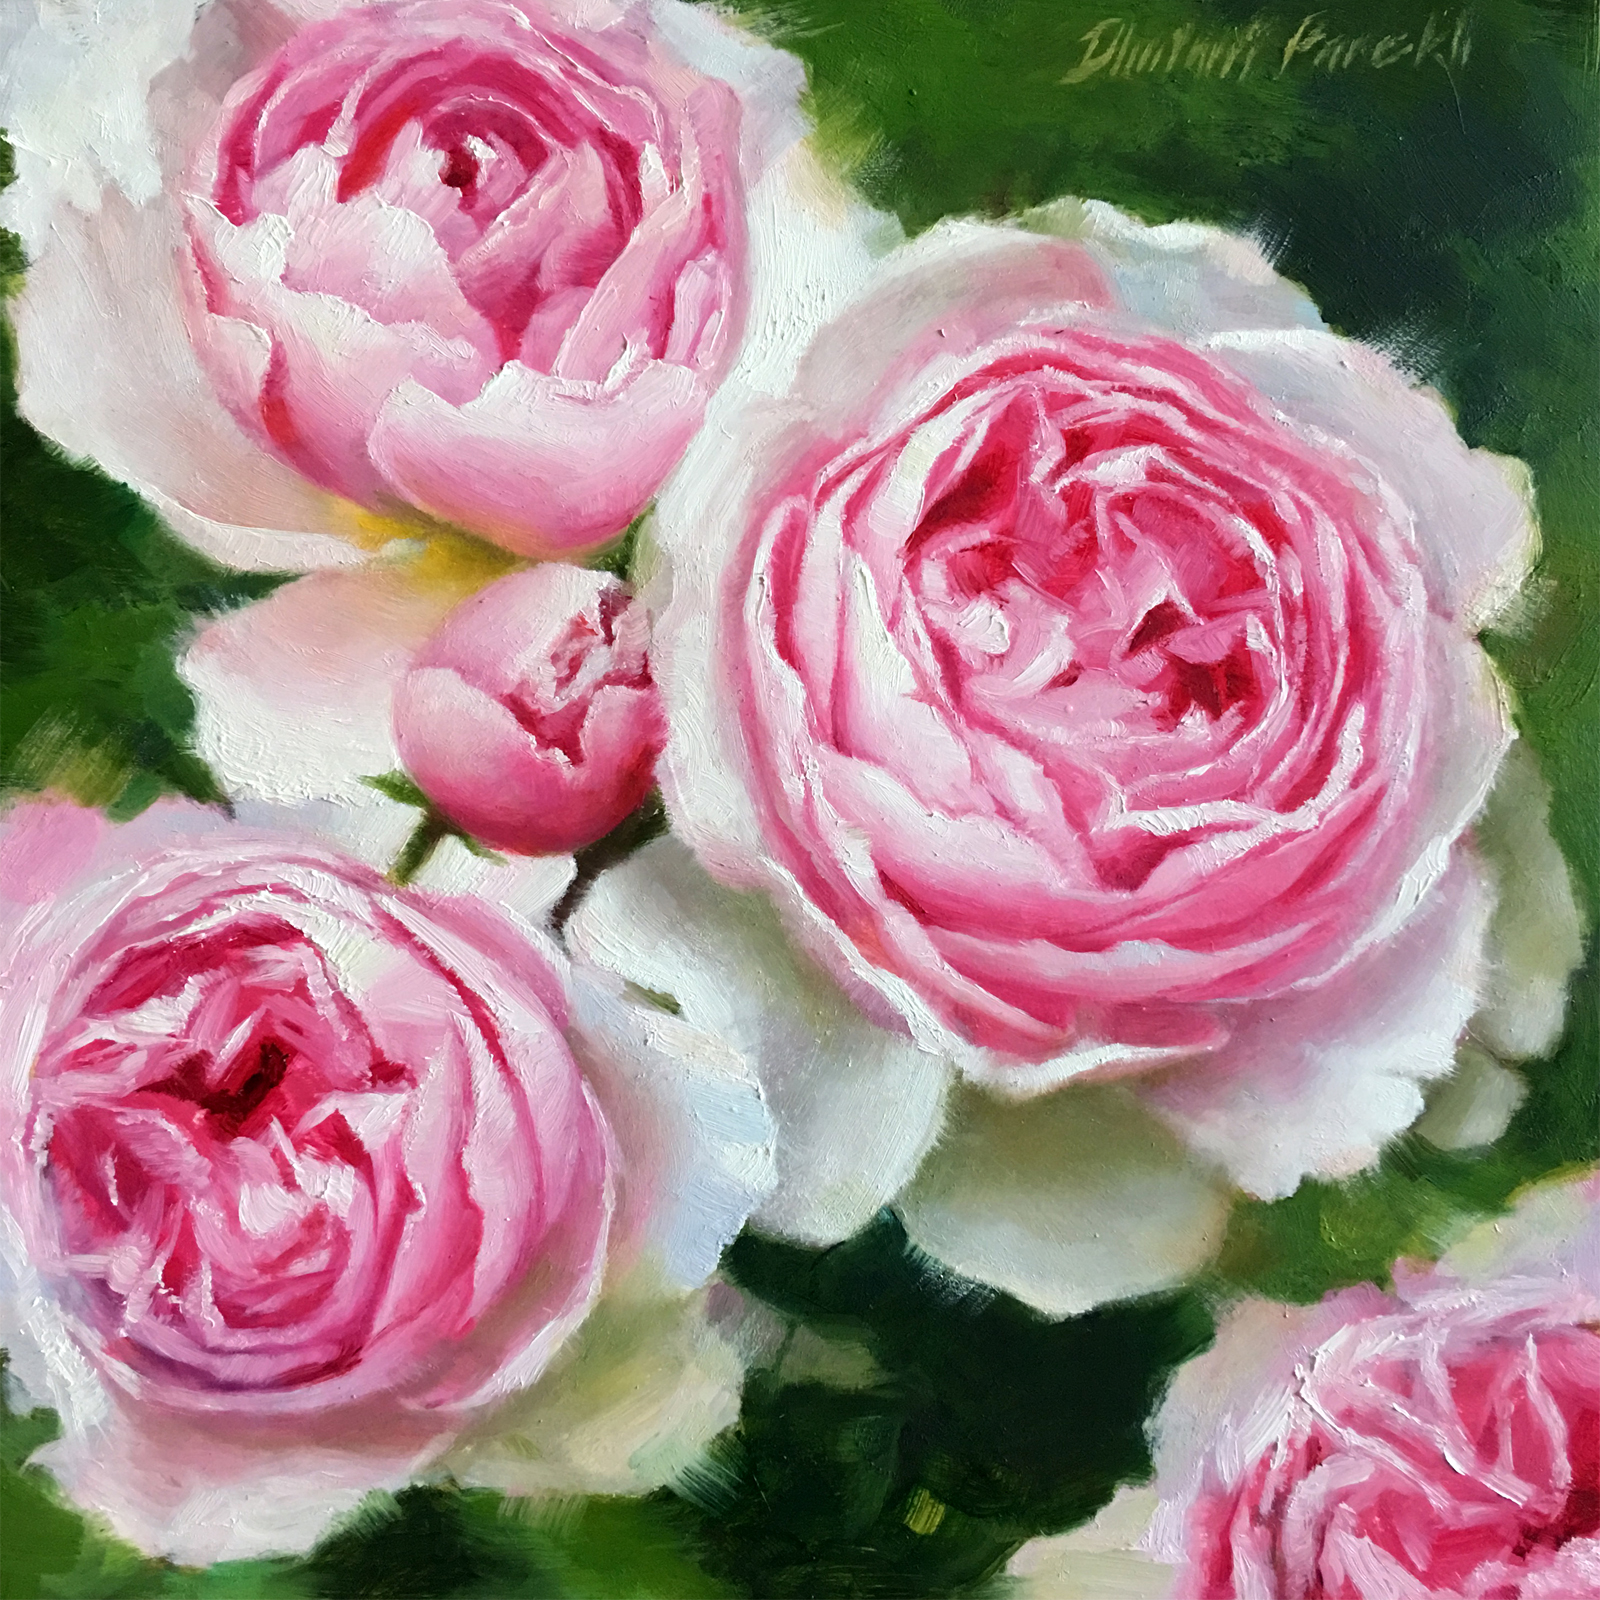  Beauty in Pink  8 x 8  Oil on Panel 